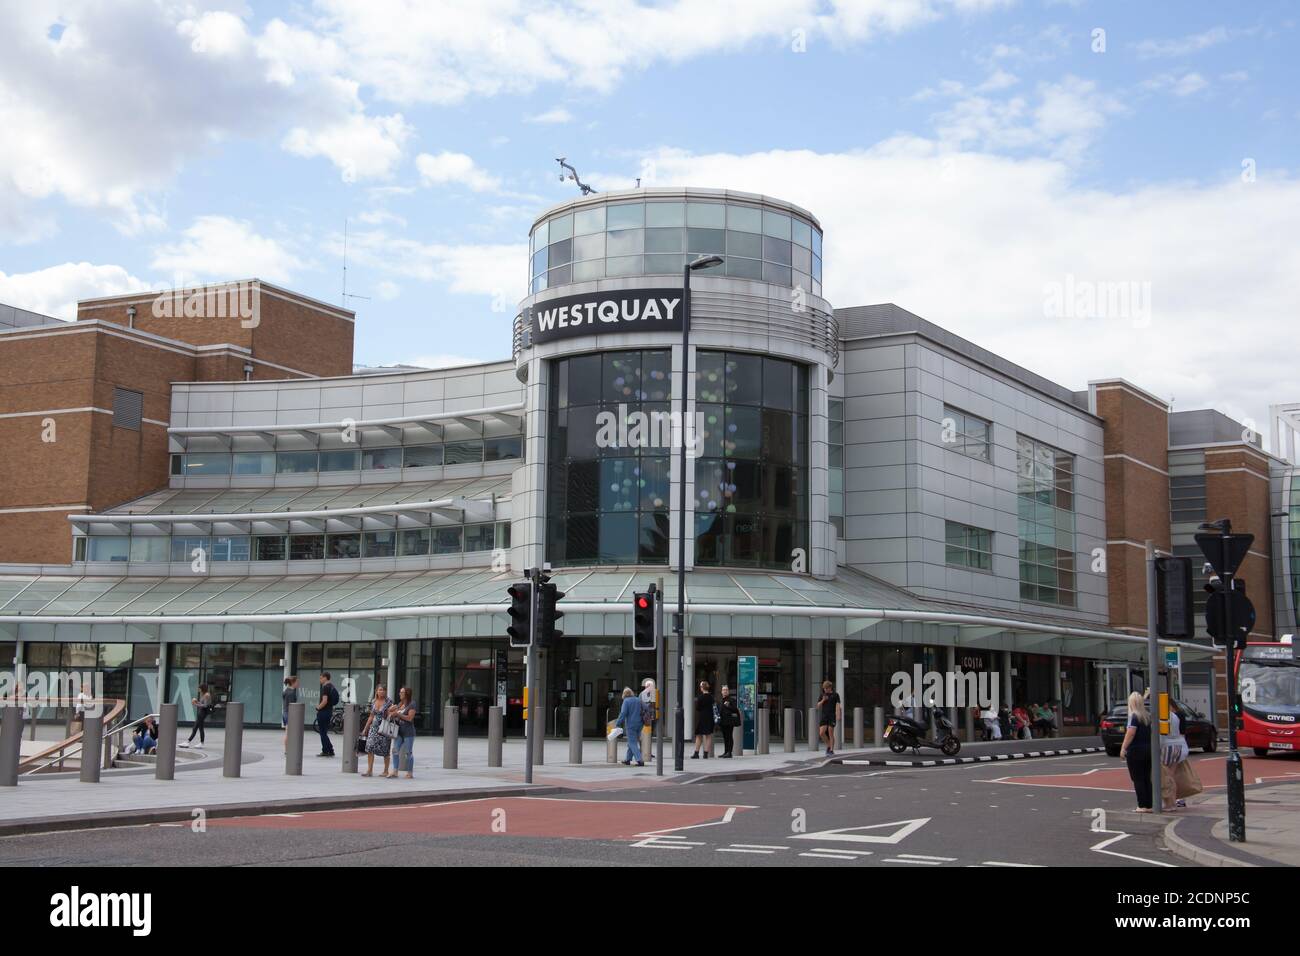 The Westquay Shopping Centre in Southampton in the UK, taken on the 10th July 2020 Stock Photo